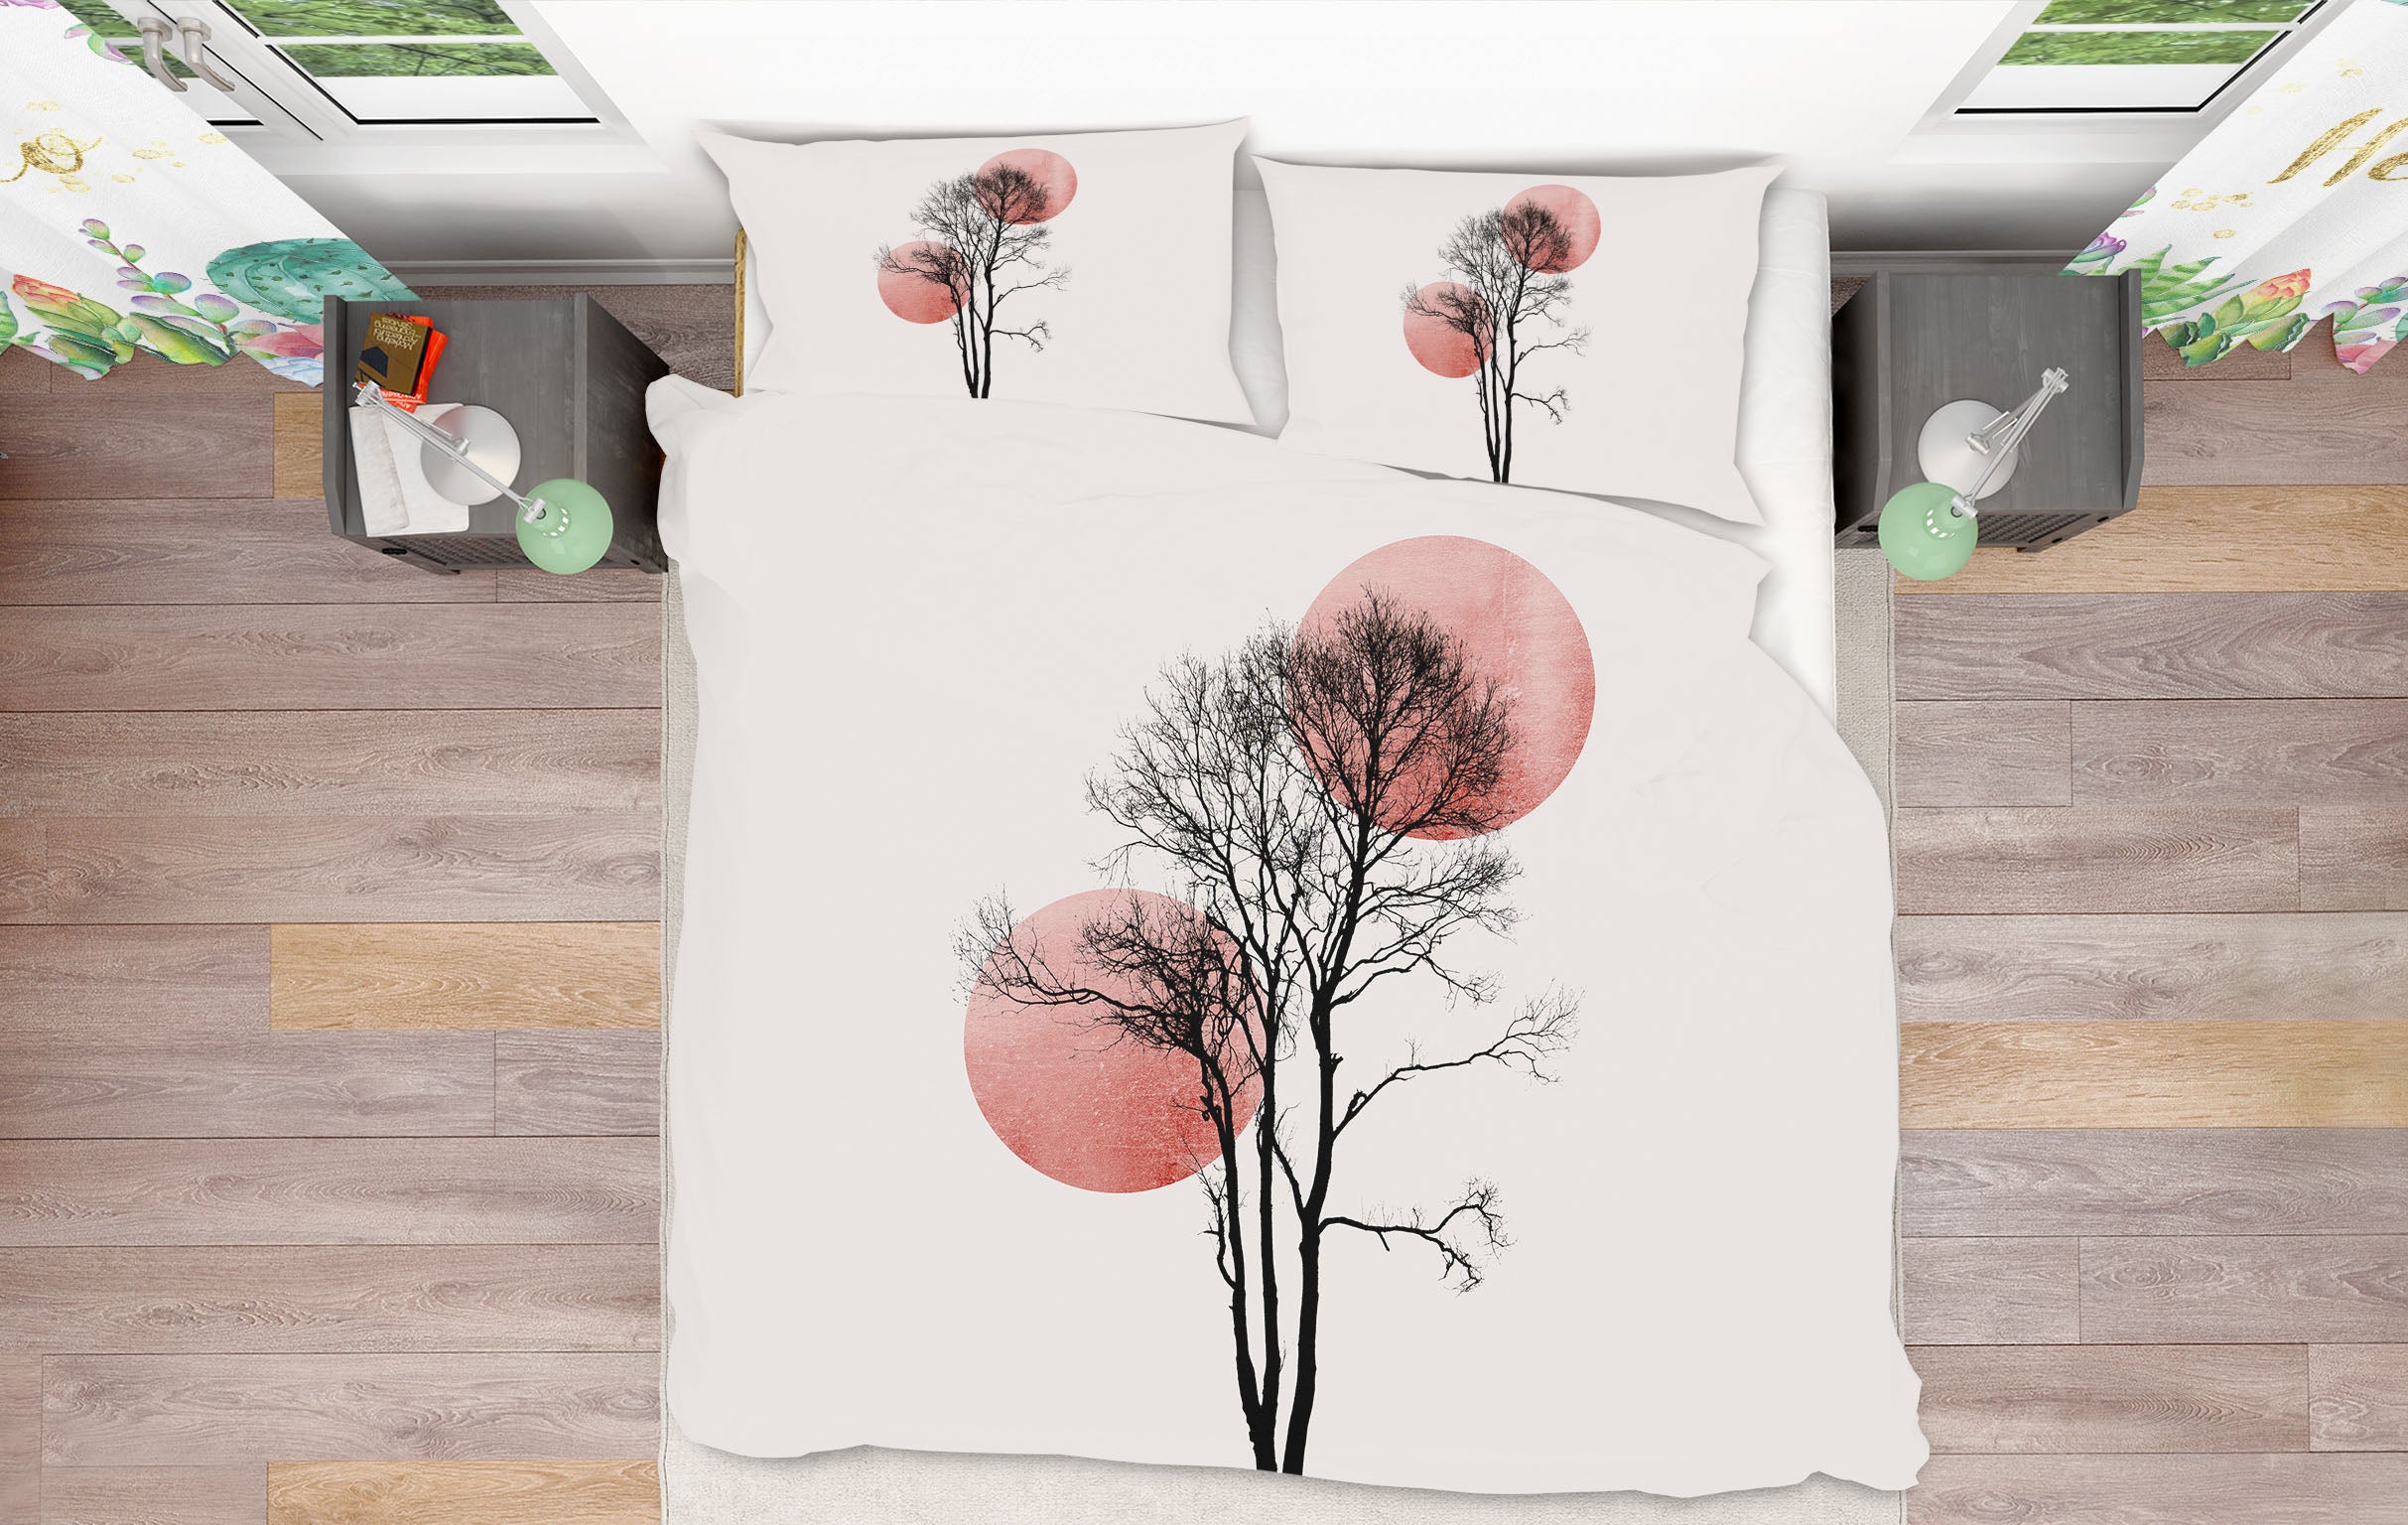 3D Moon Tree Painting 213 Boris Draschoff Bedding Bed Pillowcases Quilt